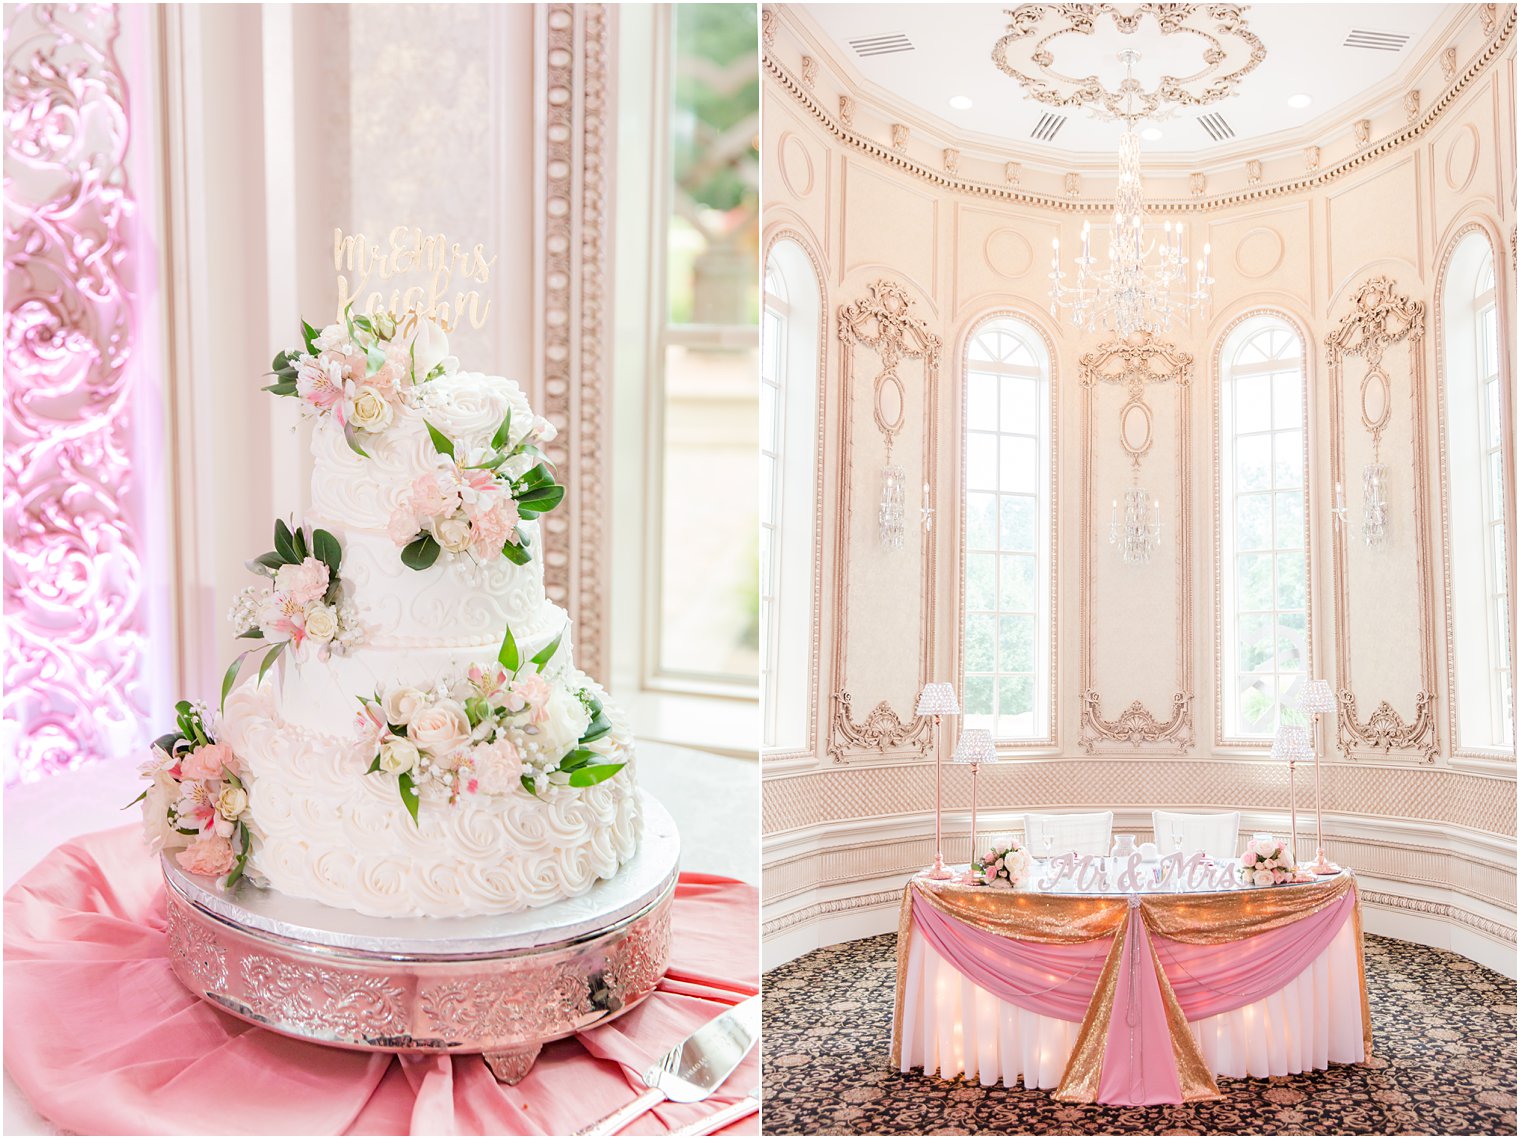 wedding reception with sweetheart table and wedding cake with pink accents at Brigalia's